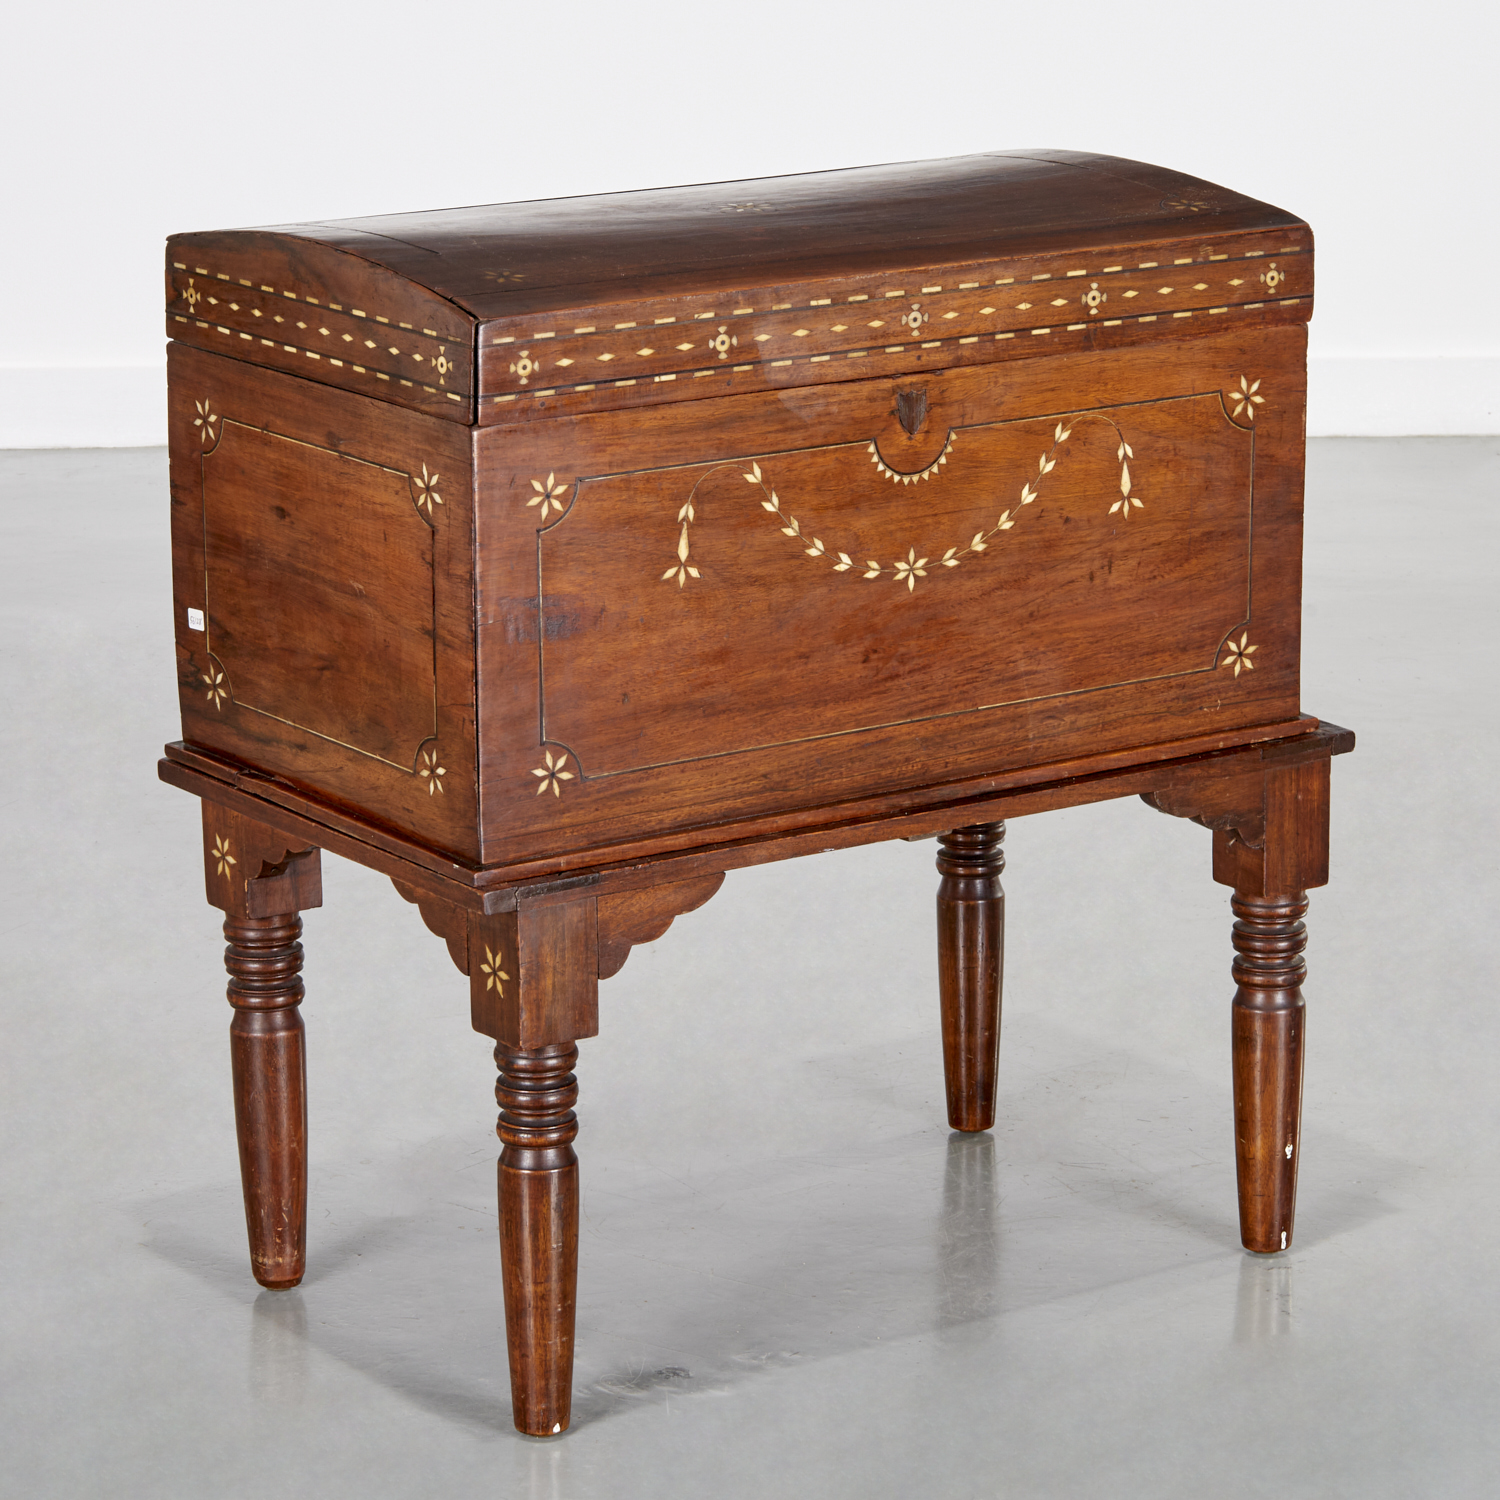 DUTCH COLONIAL INLAID CHEST ON 3ce65b